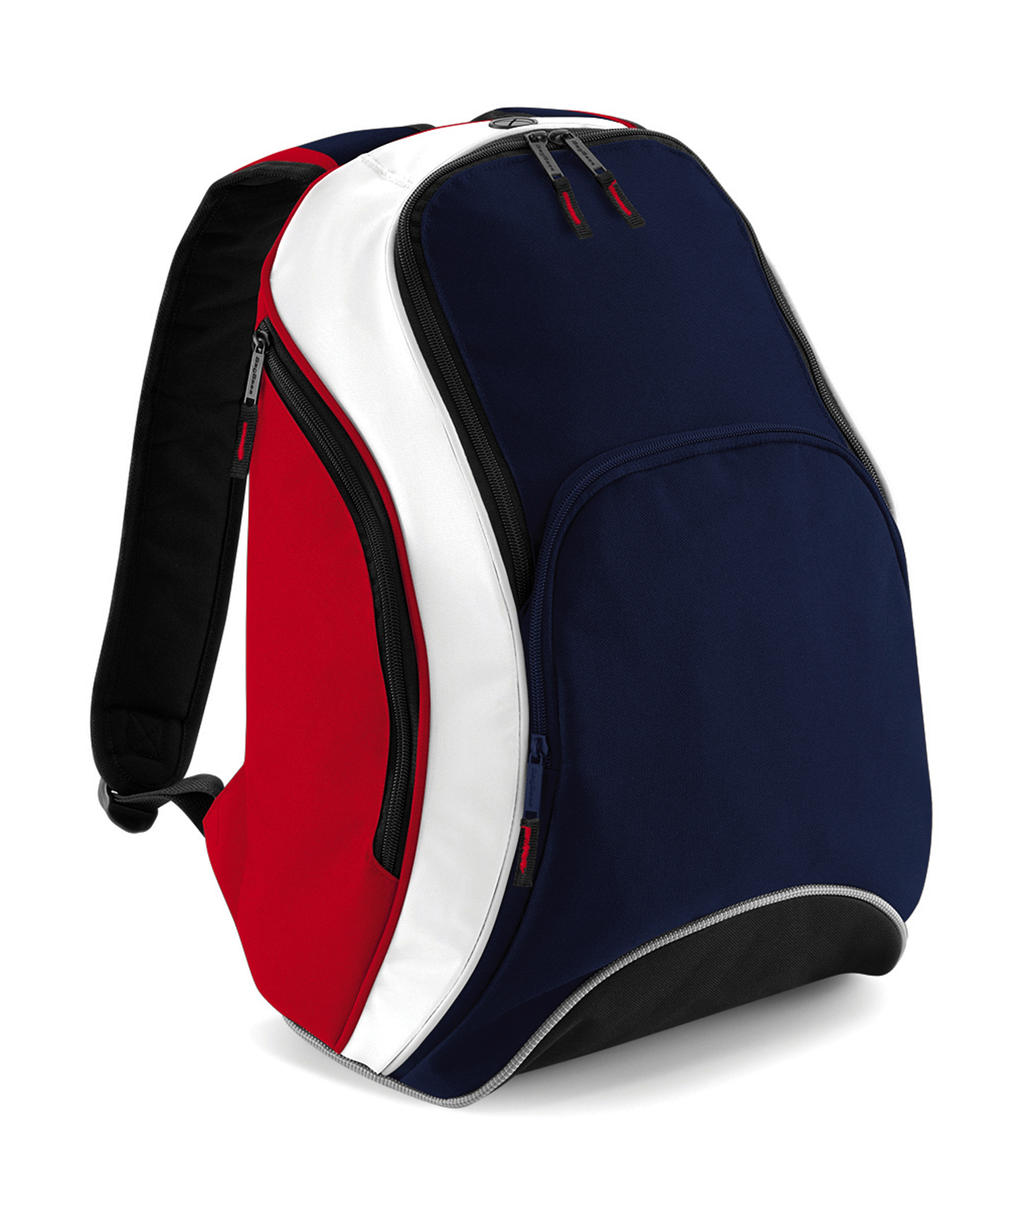  Teamwear Backpack in Farbe French Navy/Classic Red/White